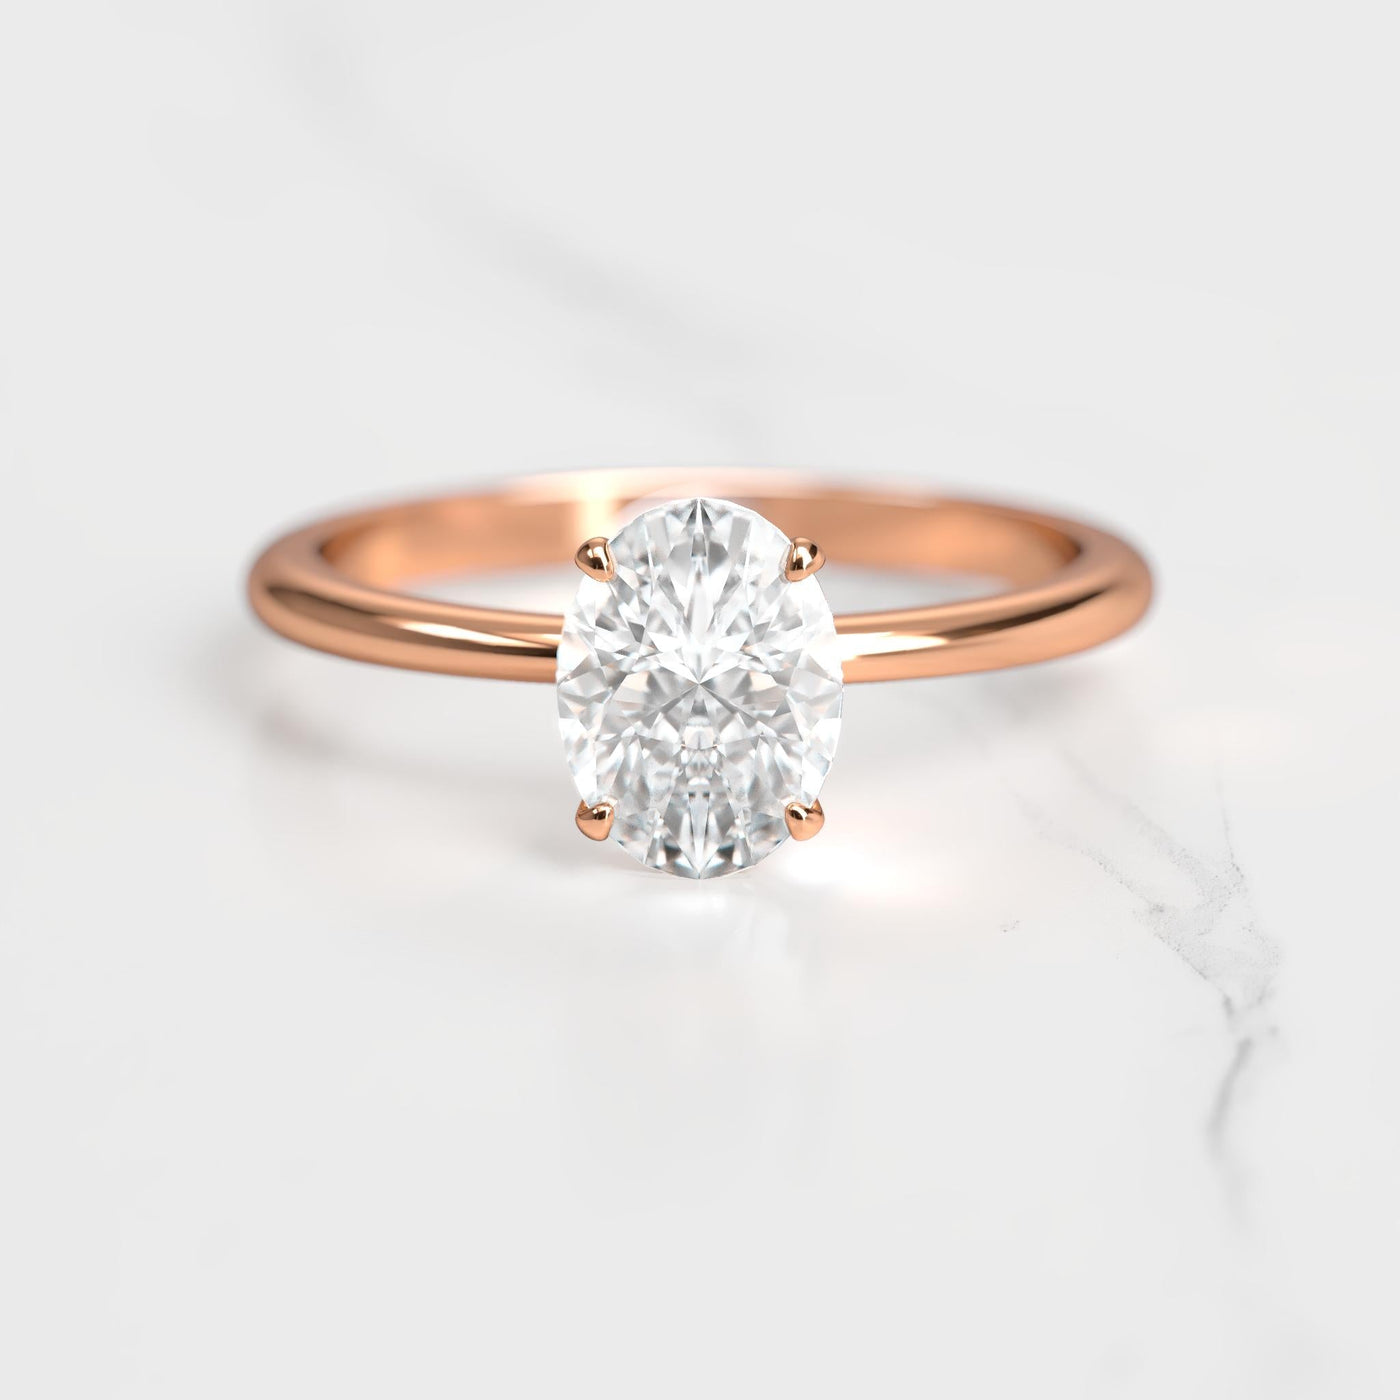 Oval Tapered Solitaire Diamond Ring